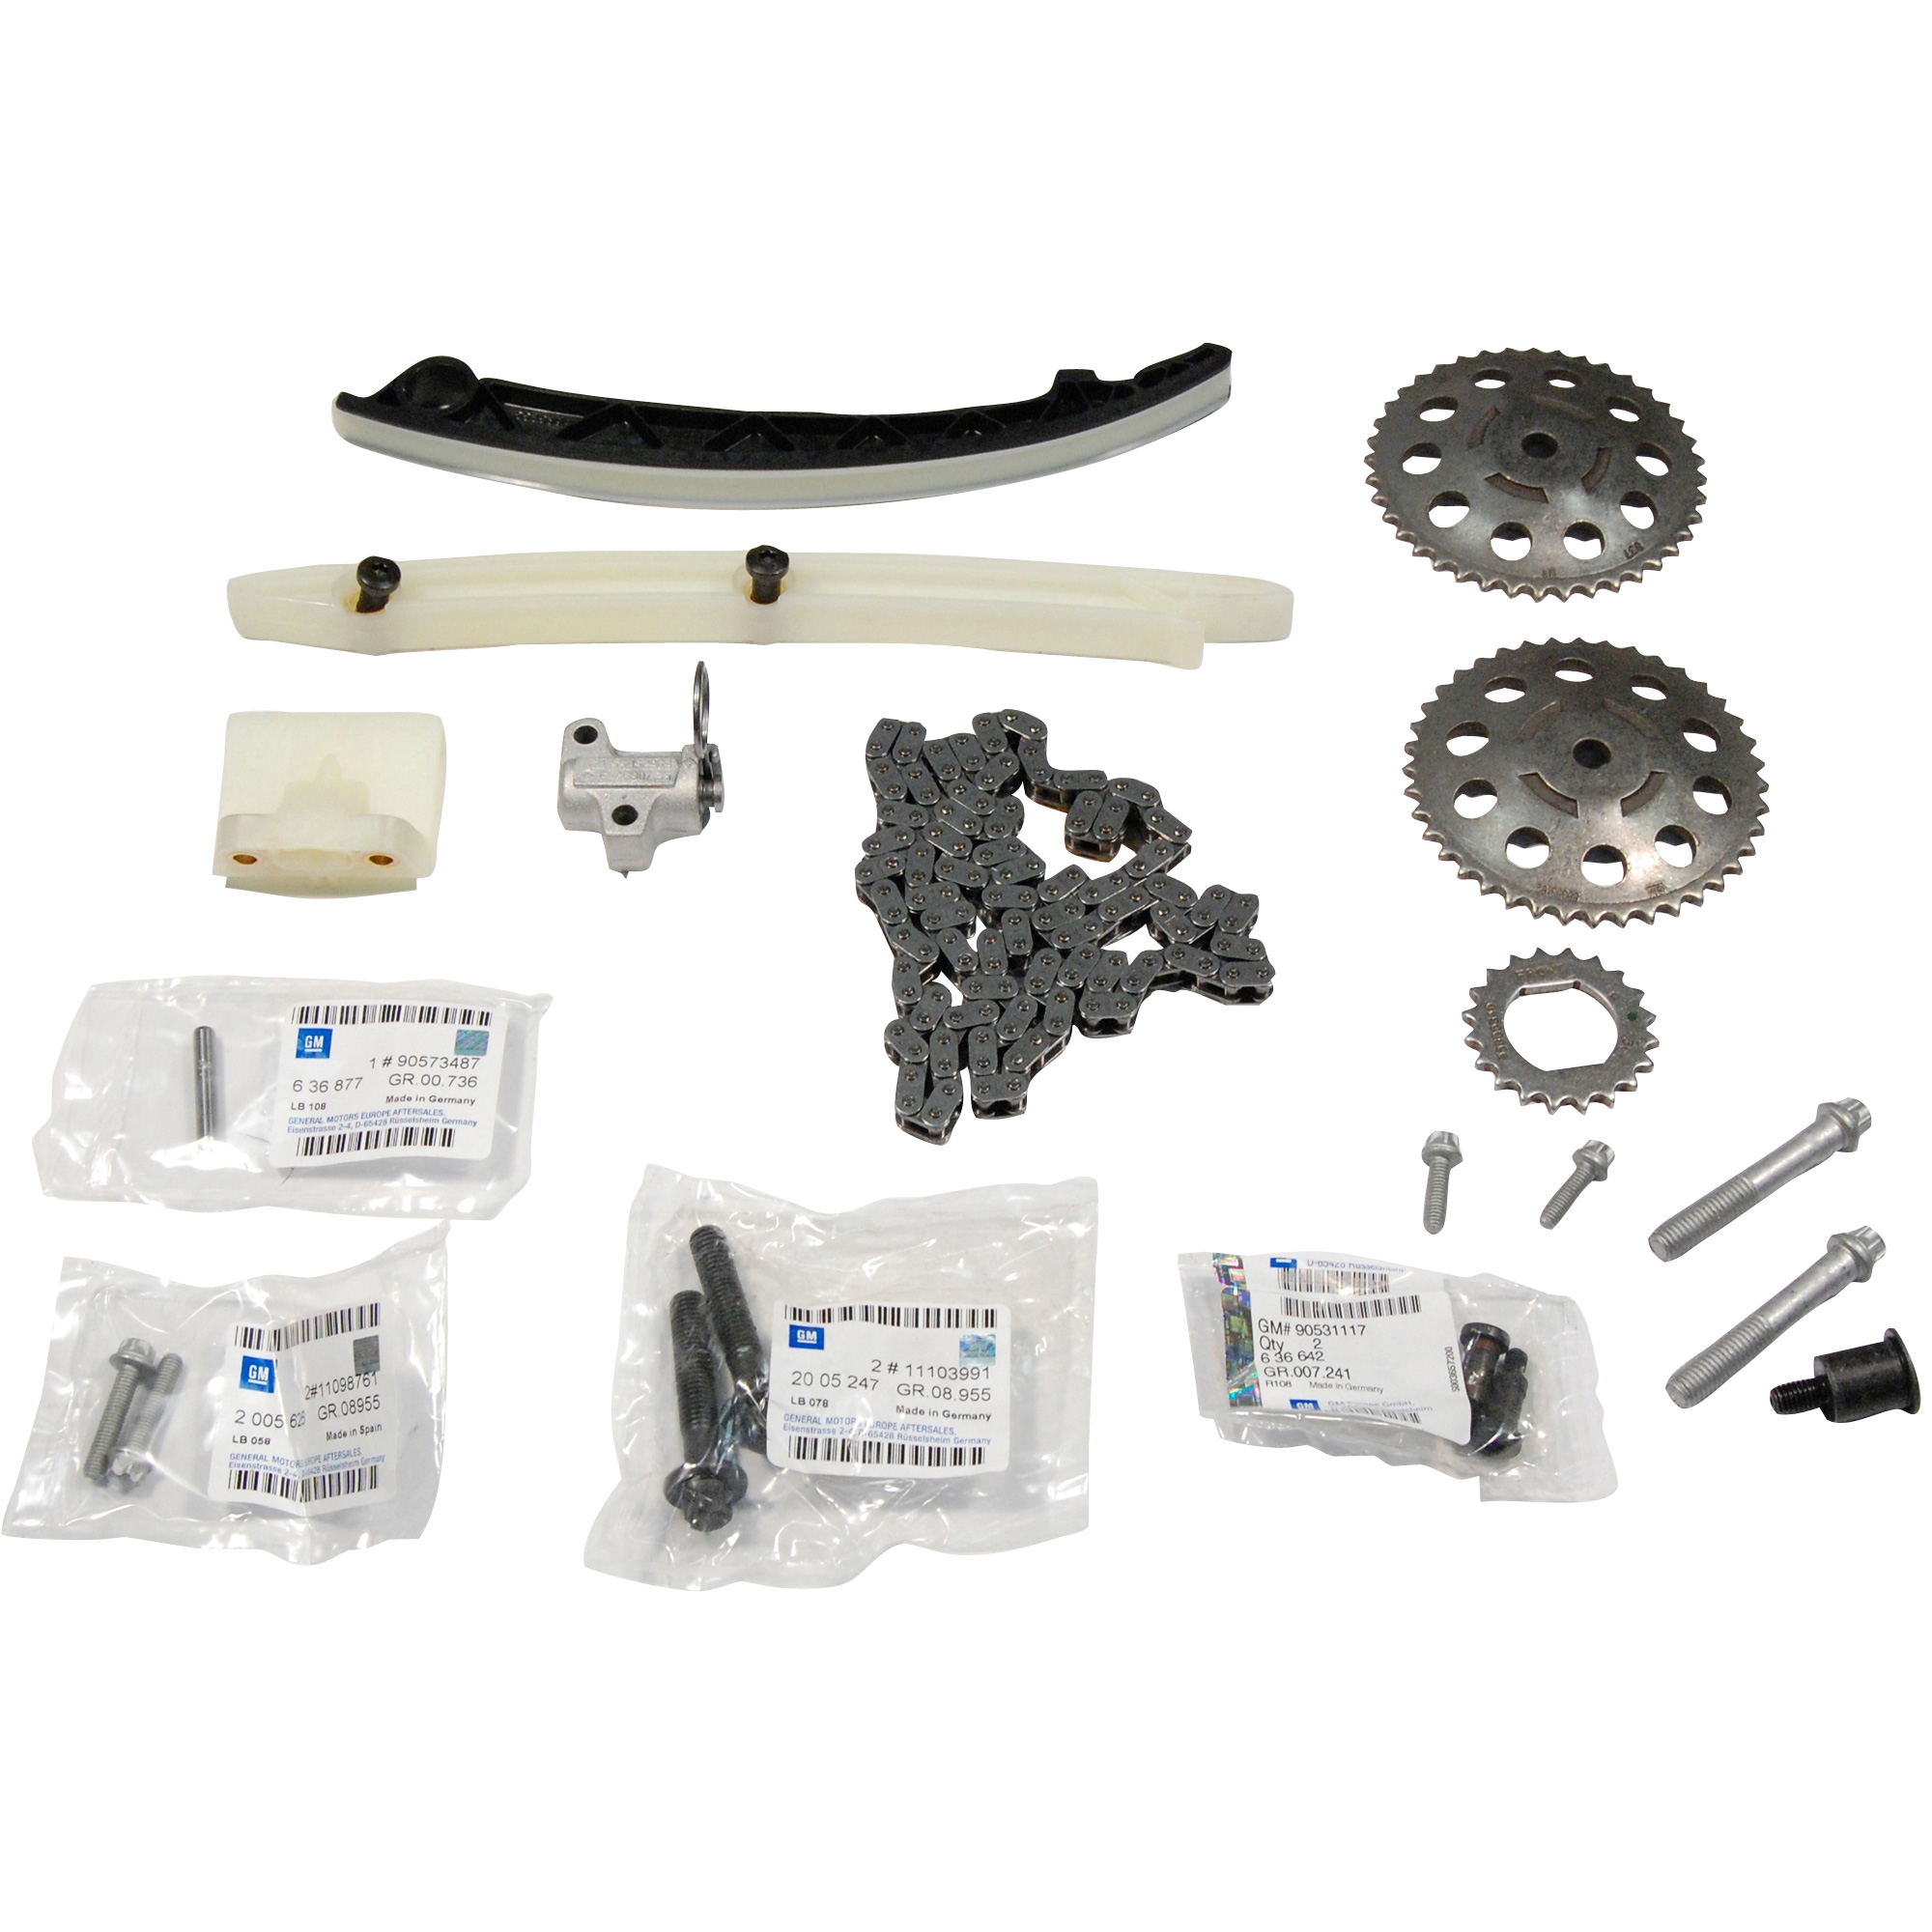 Kit distributie lant Opel Corsa C, Meriva, Tigra B, Astra G, Astra H, Agila A GM Pagina 7/piese-auto-opel-astra-g/piese-auto-ford-mustang/kit-uri-jante-anvelope-complete - Piese Auto Opel Corsa C